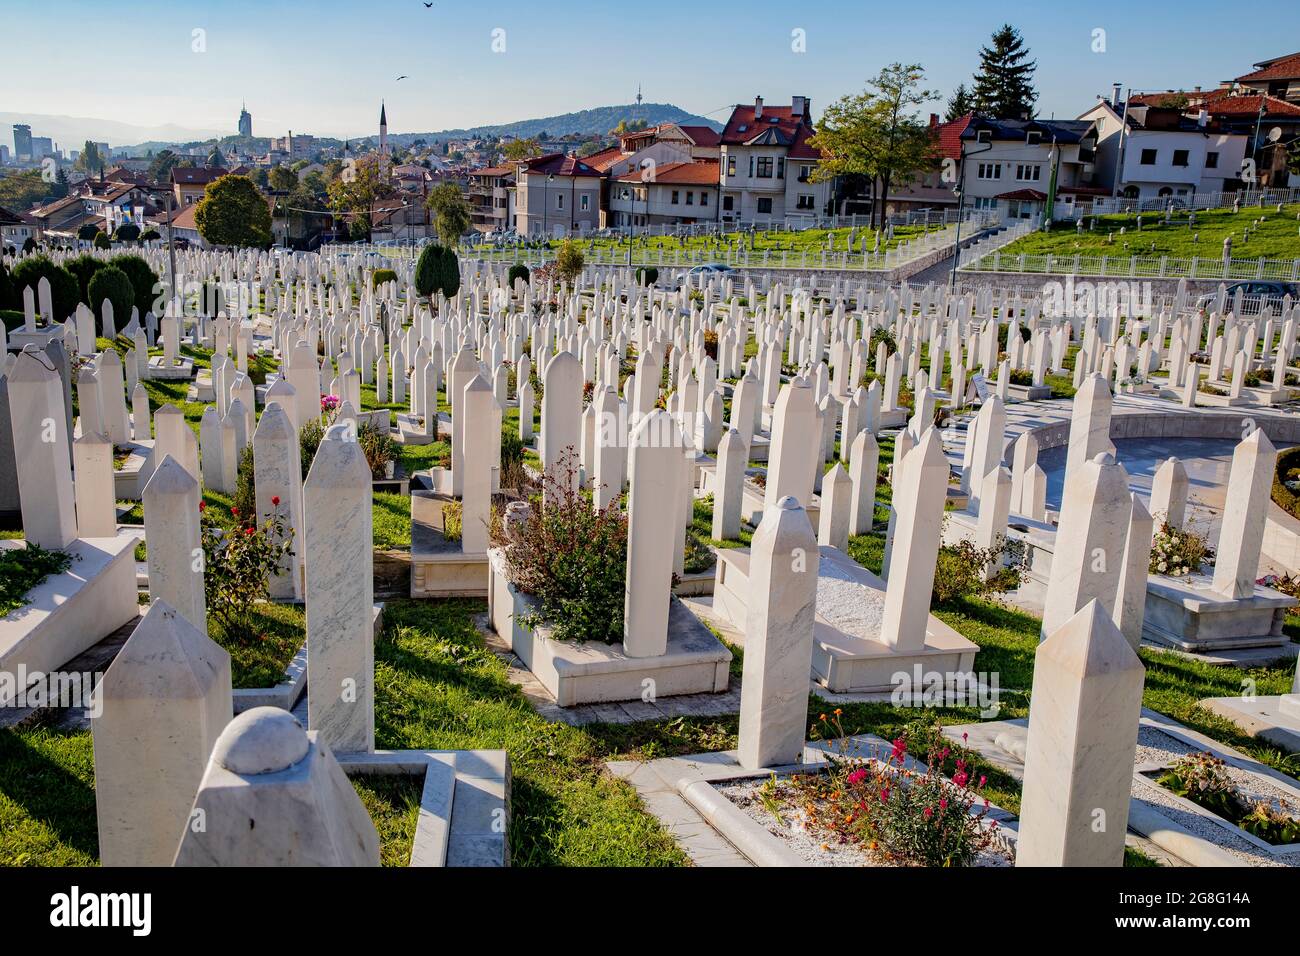 Martyrs' Memorial Cemetery Kovaci, the main cemetery for soldiers from the Bosnian Army, Stari Grad, Sarajevo, Bosnia, Europe Stock Photo